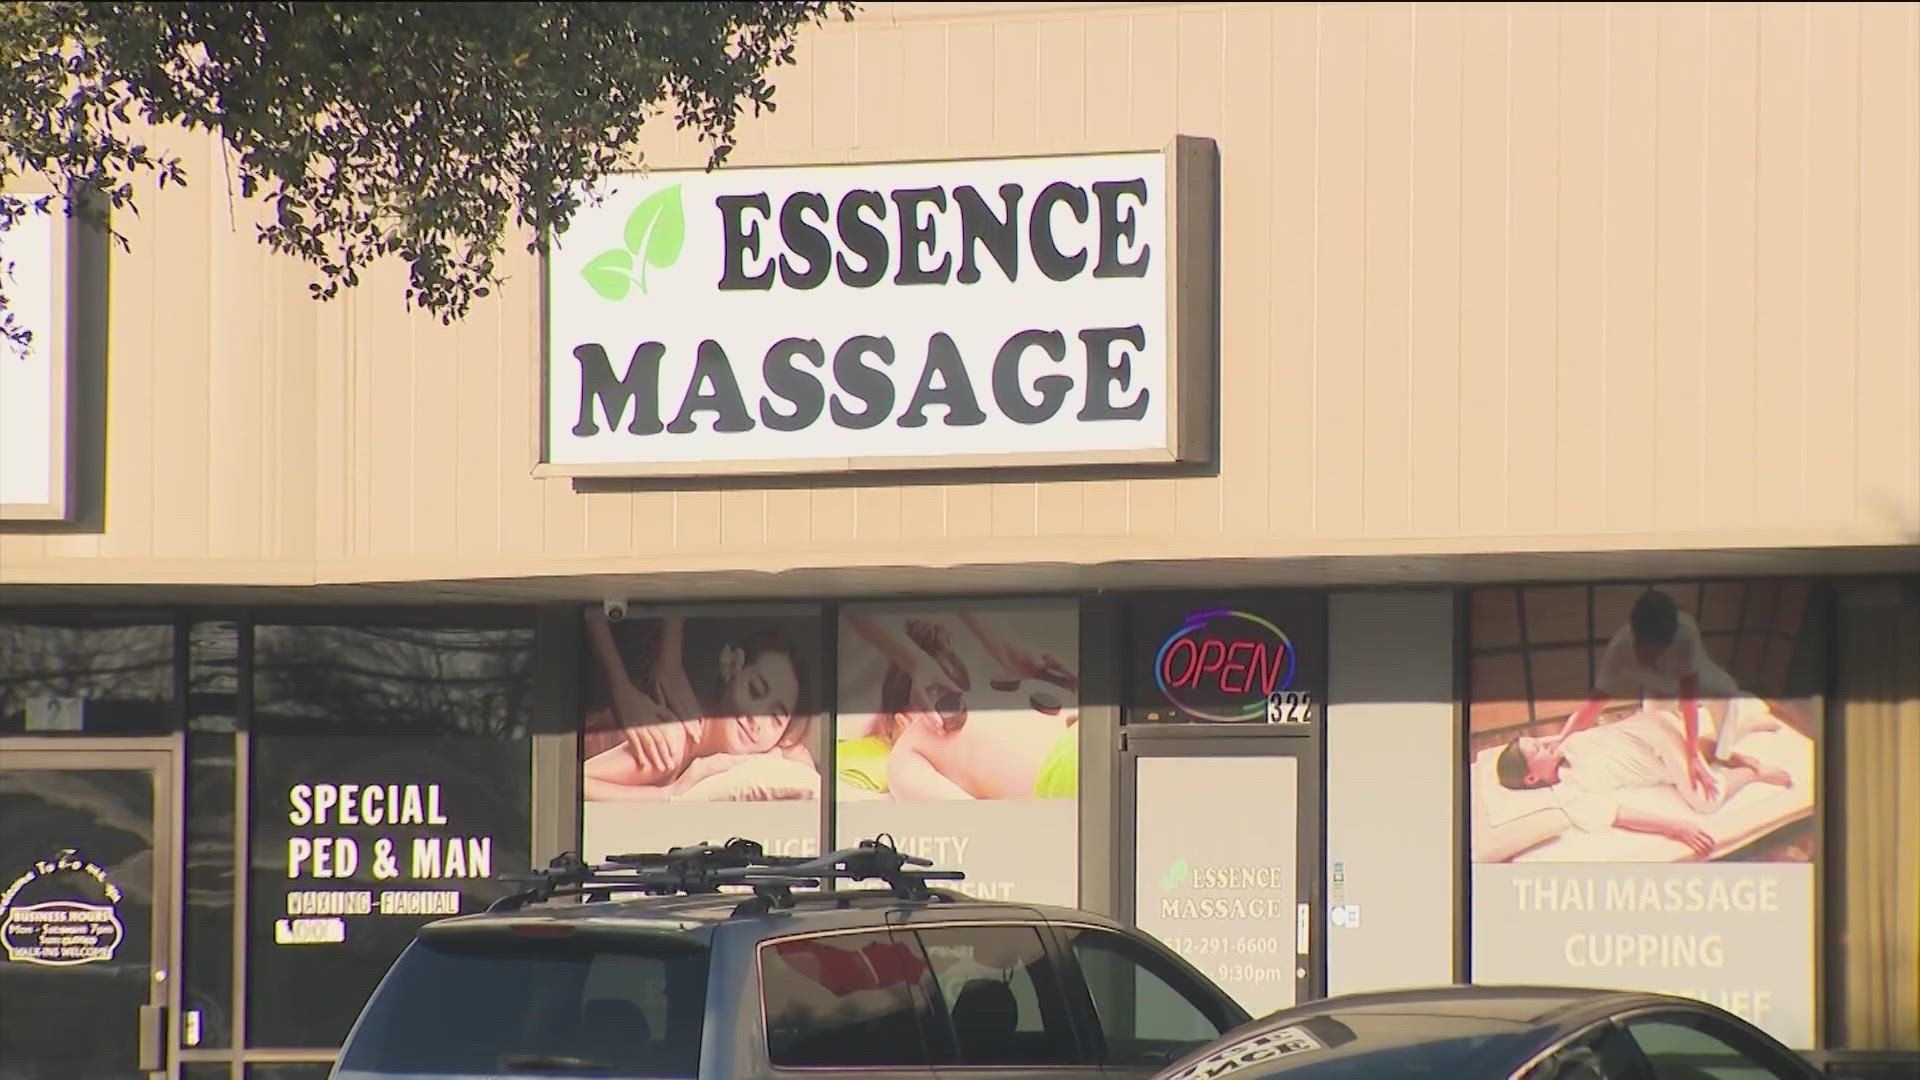 An investigation found evidence of illicit sexual activity at Essence Massage in northwest Austin, the lawsuit says.